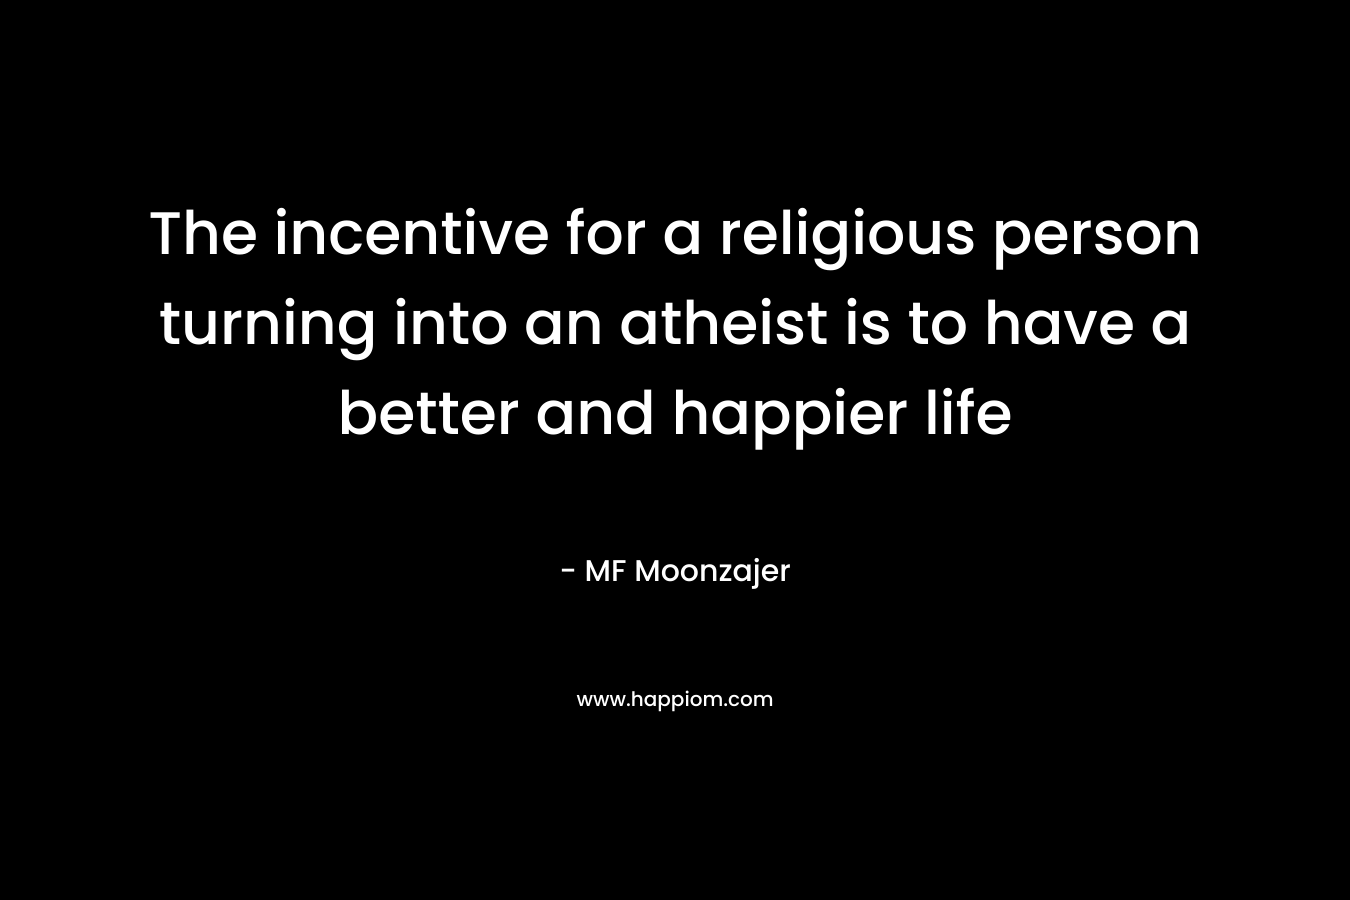 The incentive for a religious person turning into an atheist is to have a better and happier life – MF Moonzajer